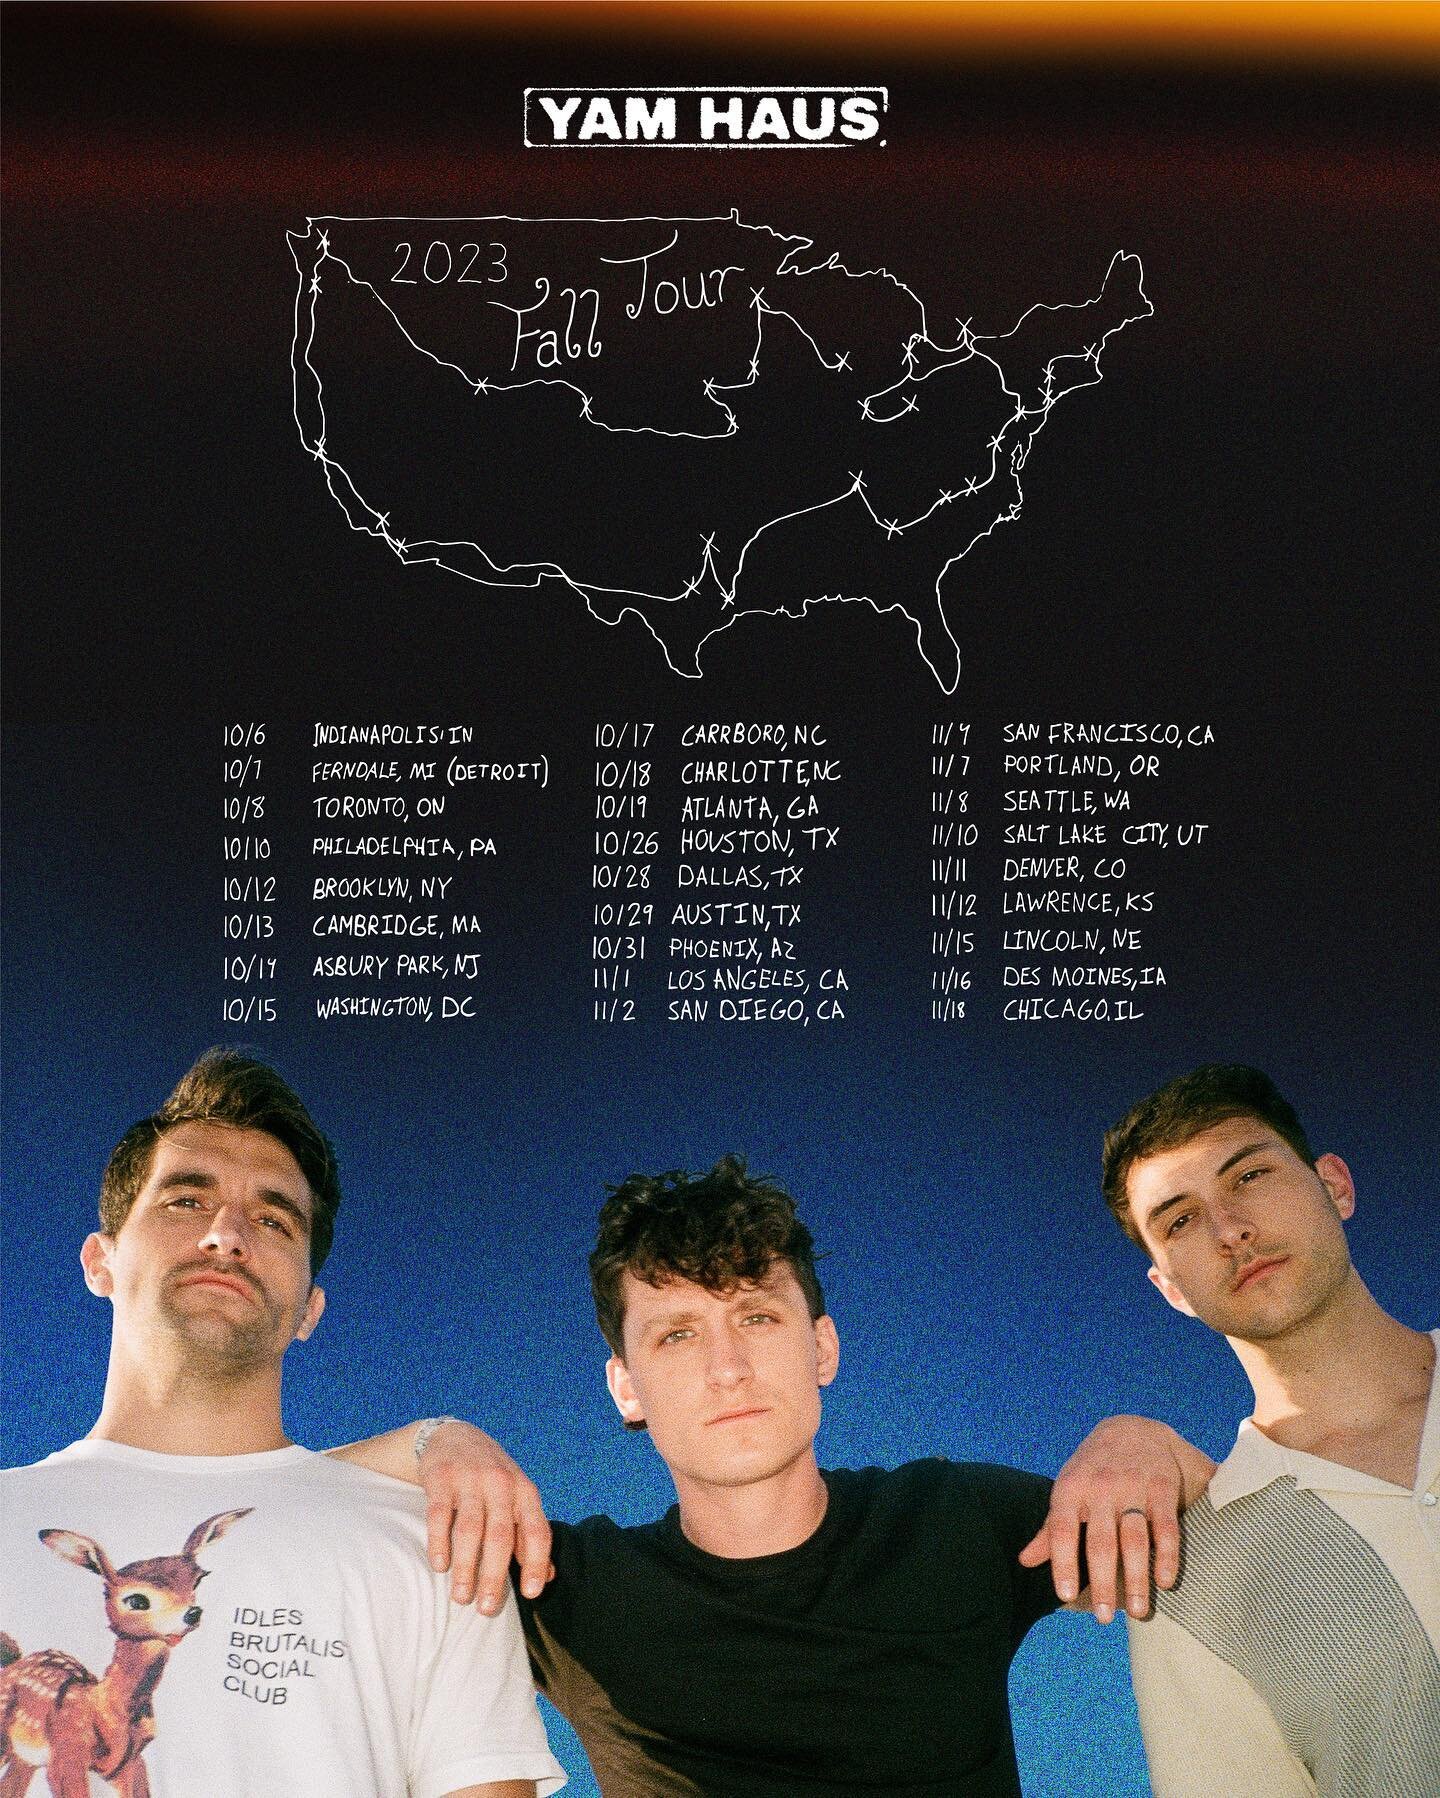 our biggest tour yet. it&rsquo;s gonna be a party. invite all your friends 💕 

tickets go on sale Friday 11 am CT

yamhaus.com